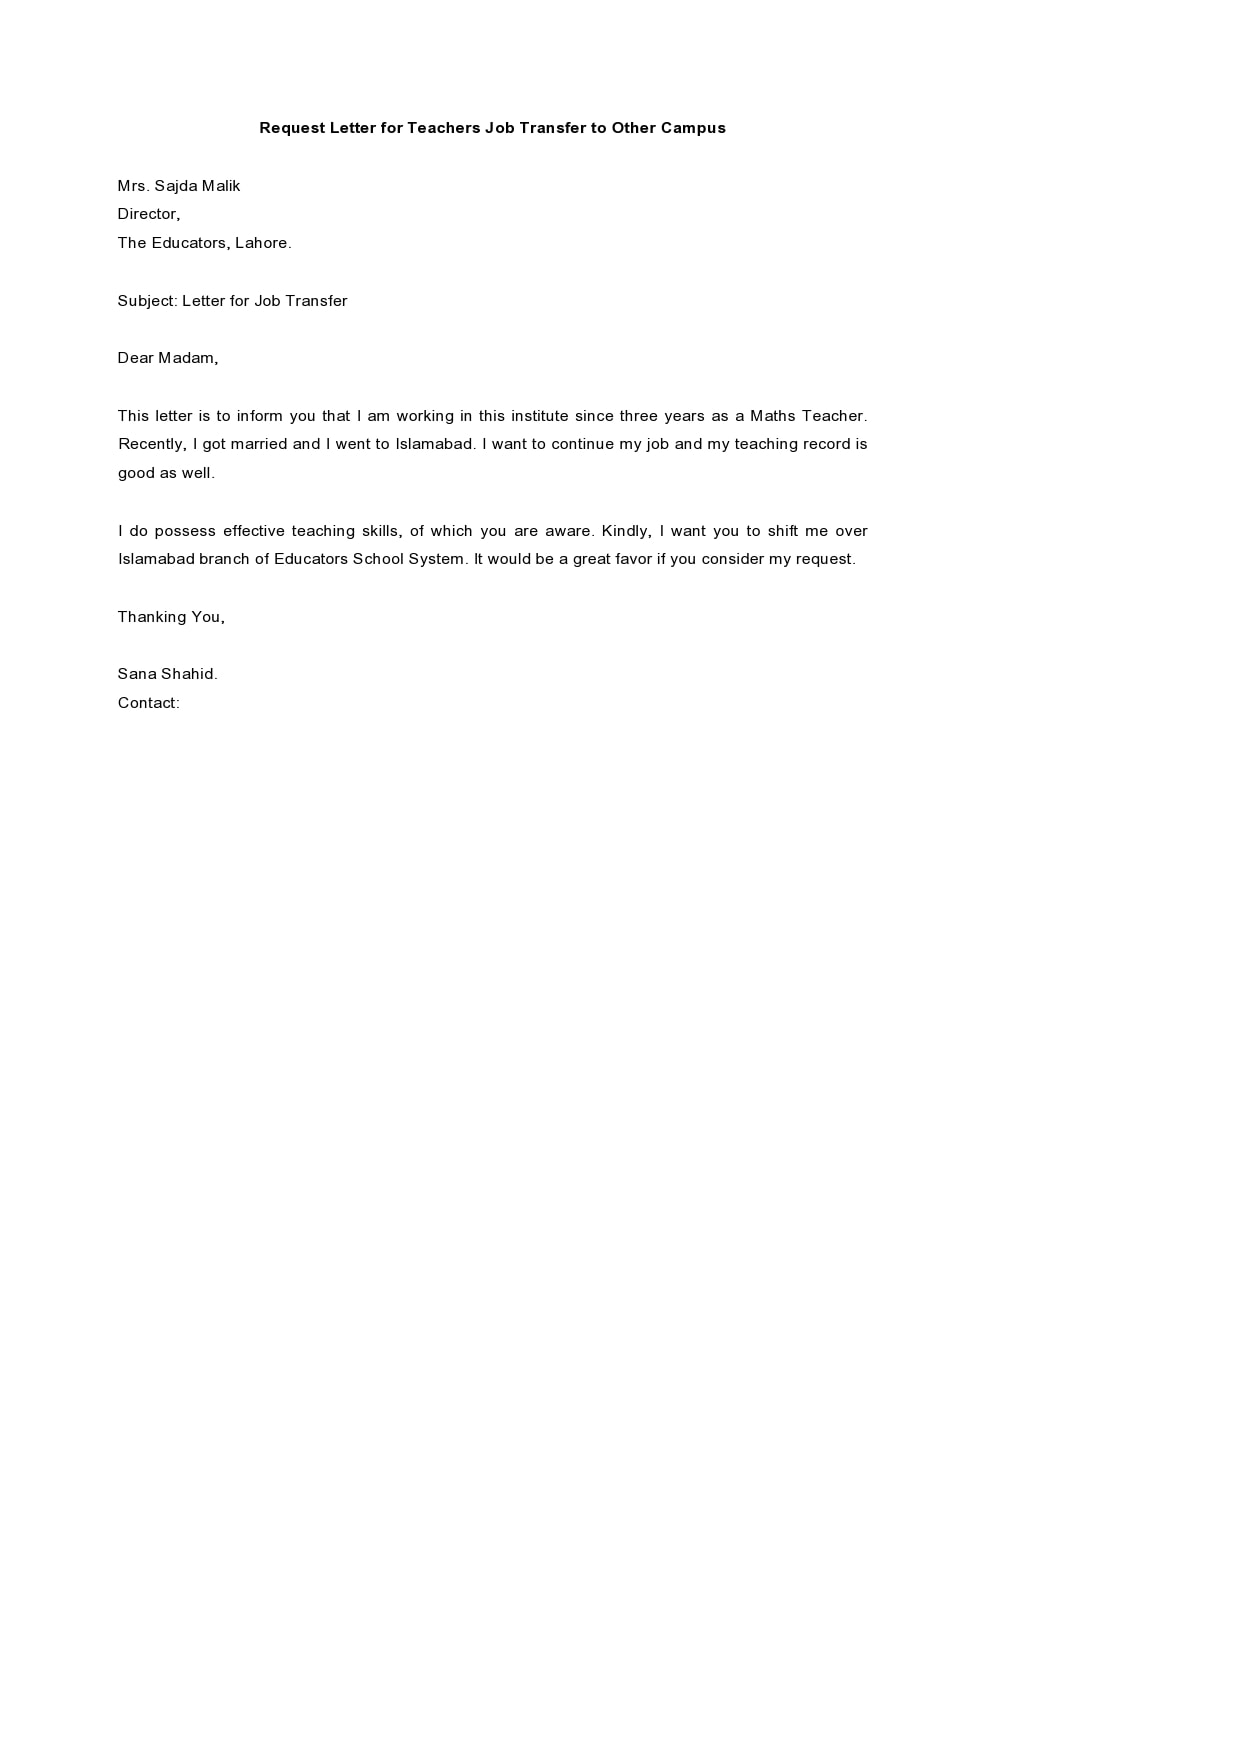 Job Transfer Request Letter from templatearchive.com